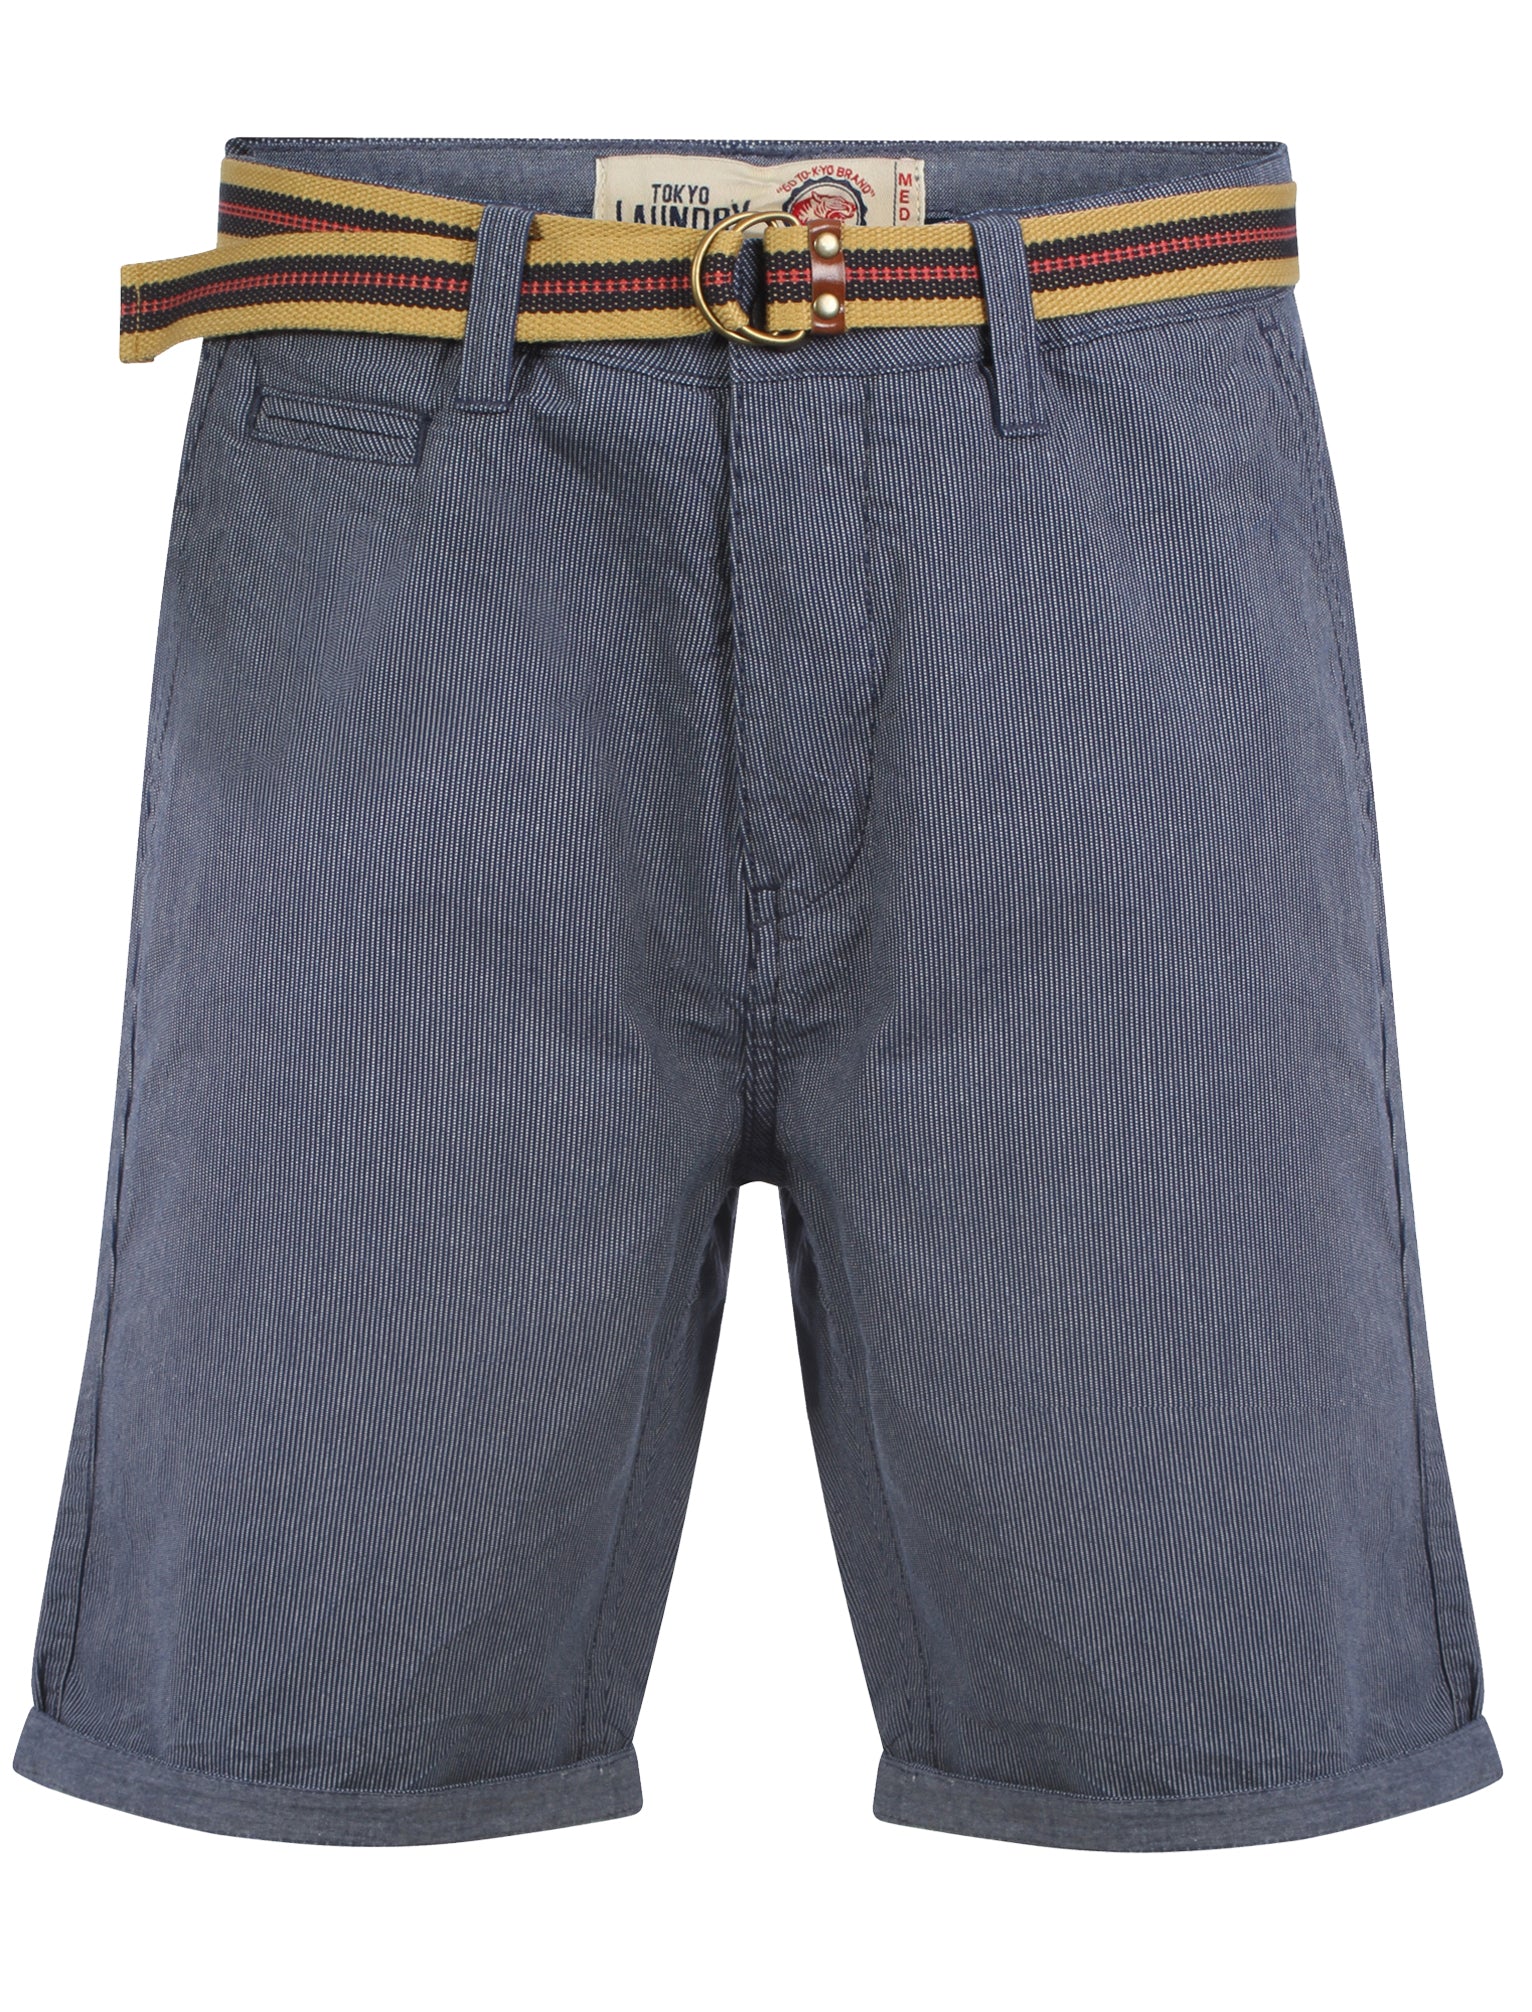 Shorts Farag Belted Shorts in Blue/White Stripe - Tokyo Laundry / S - Tokyo Laundry